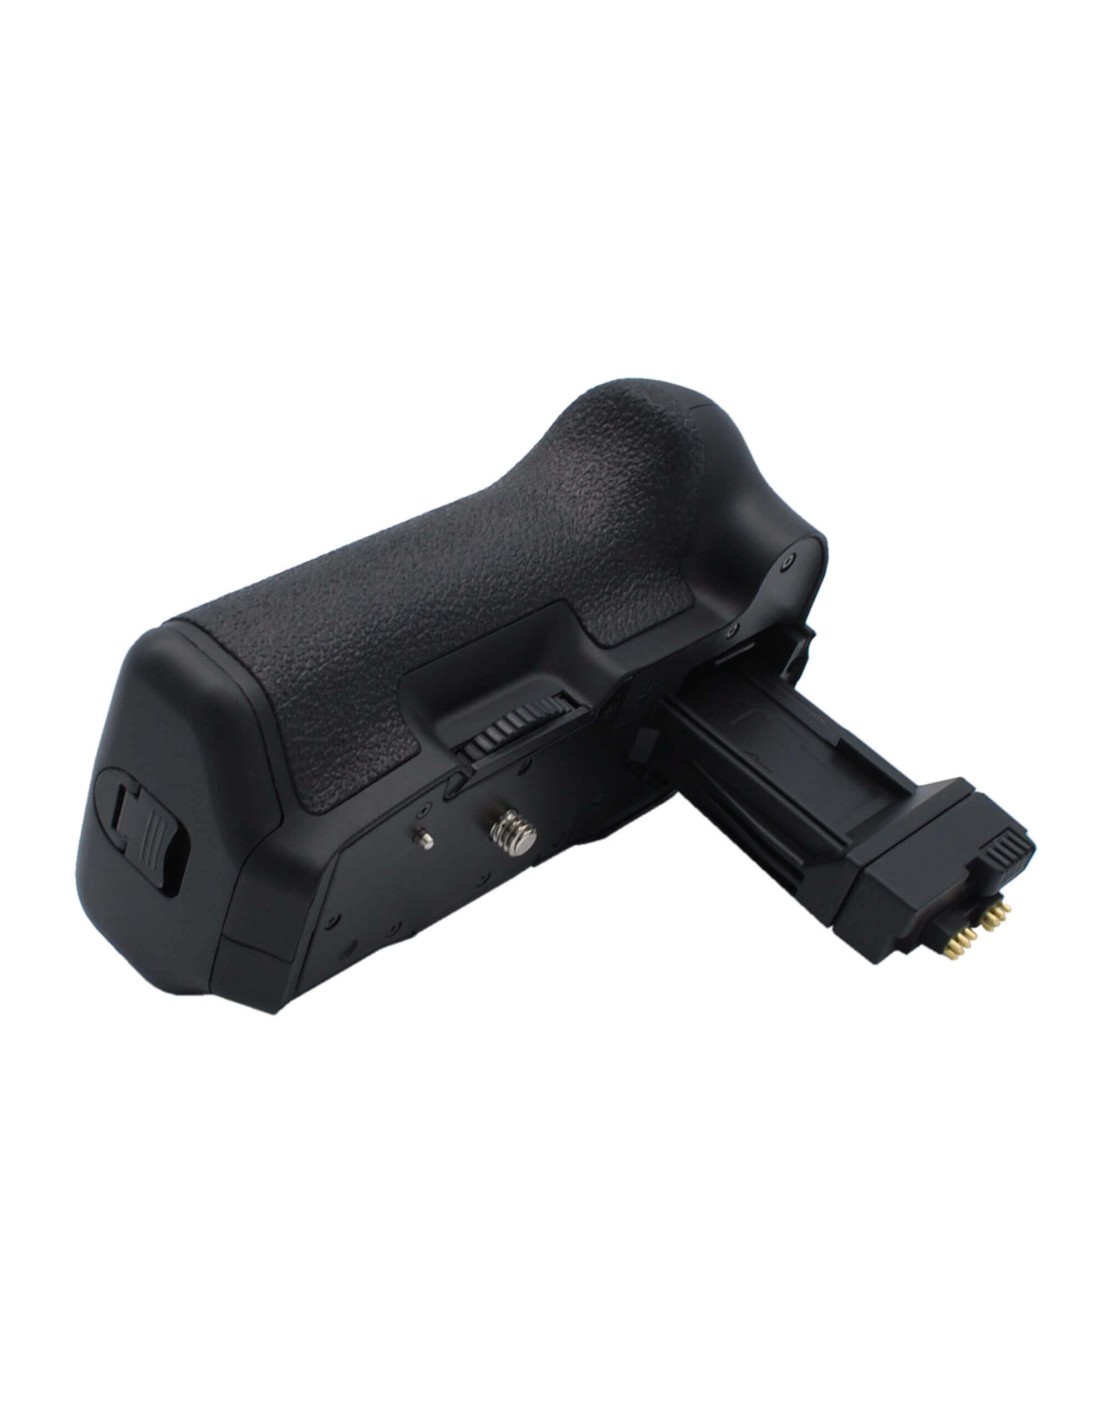 Battery Grip for Canon, Eos 550d Replaces model:- Bg-e8